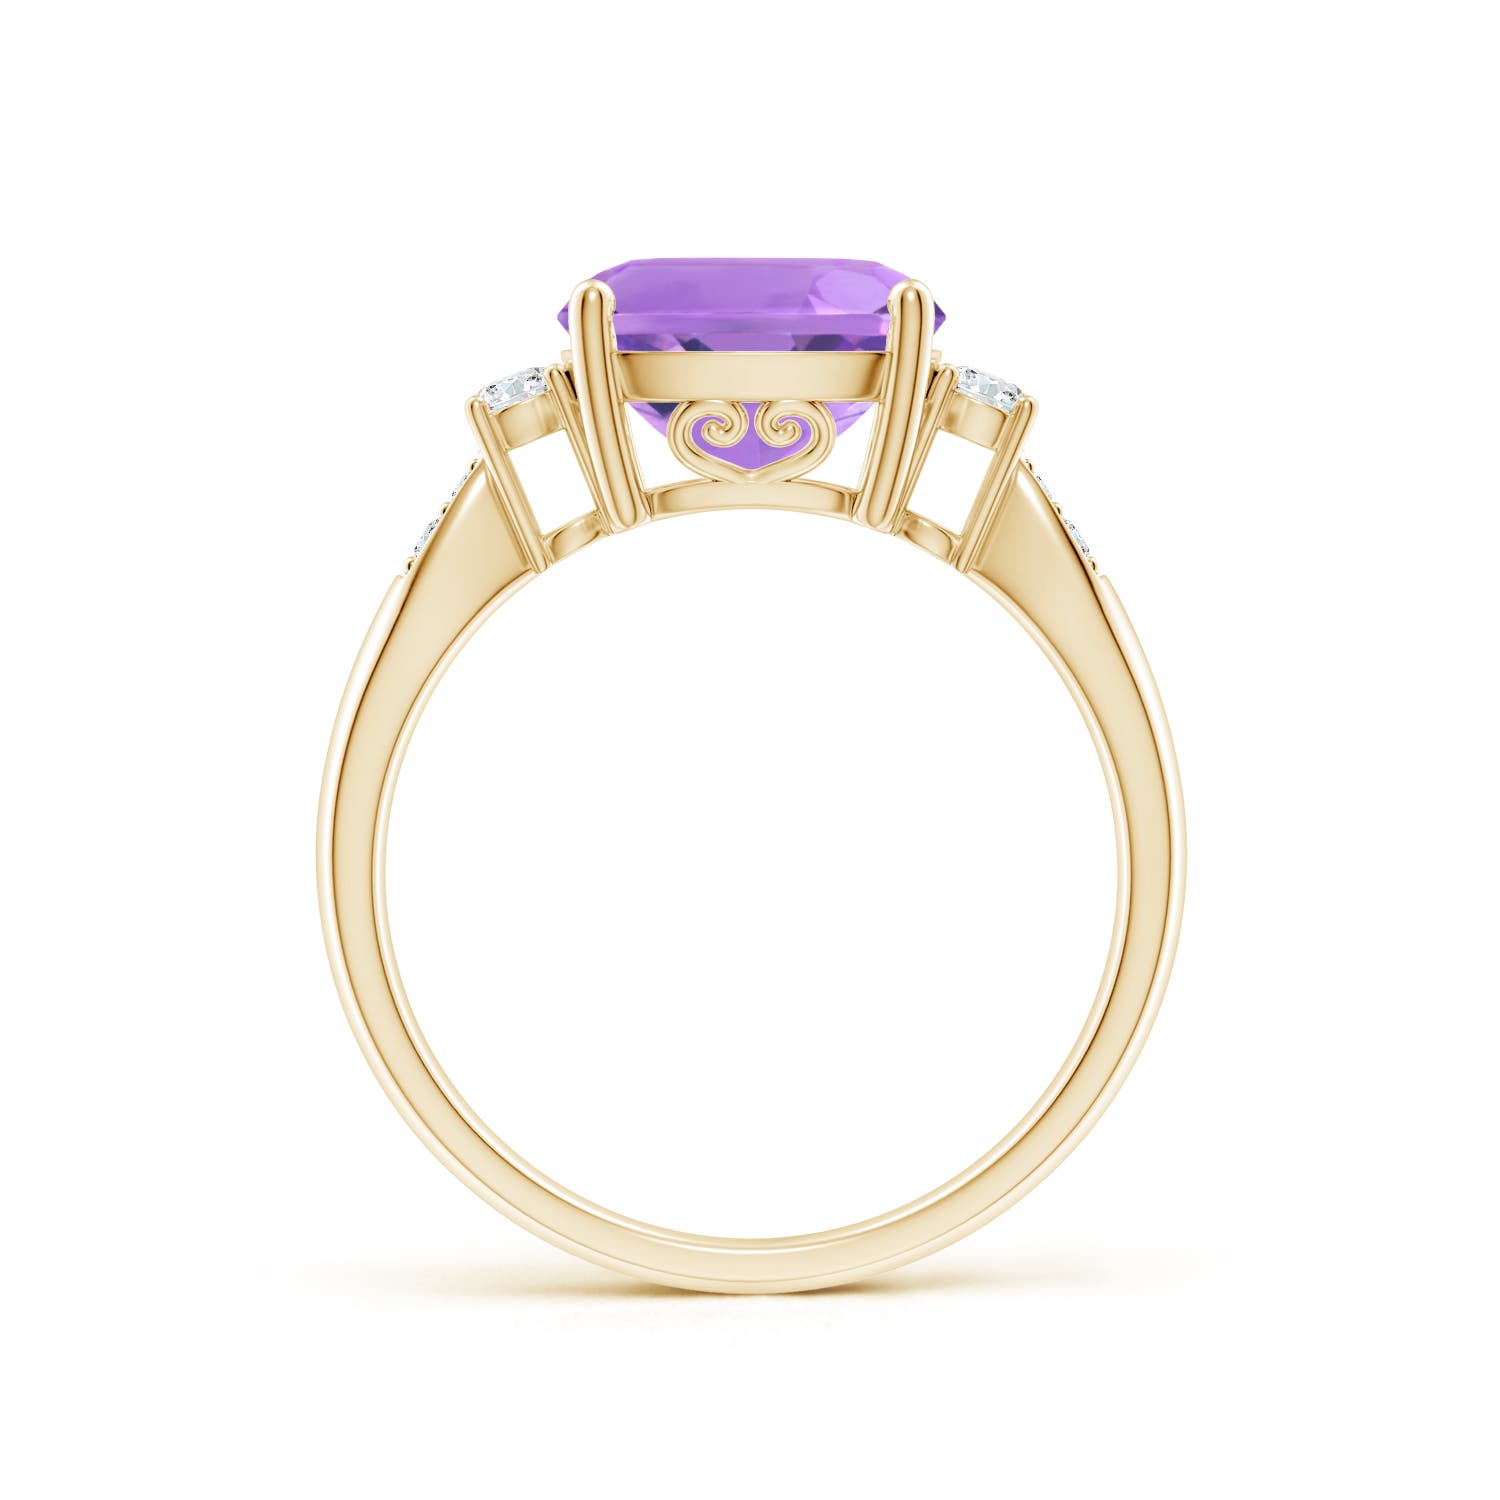 A - Amethyst / 3.27 CT / 14 KT Yellow Gold